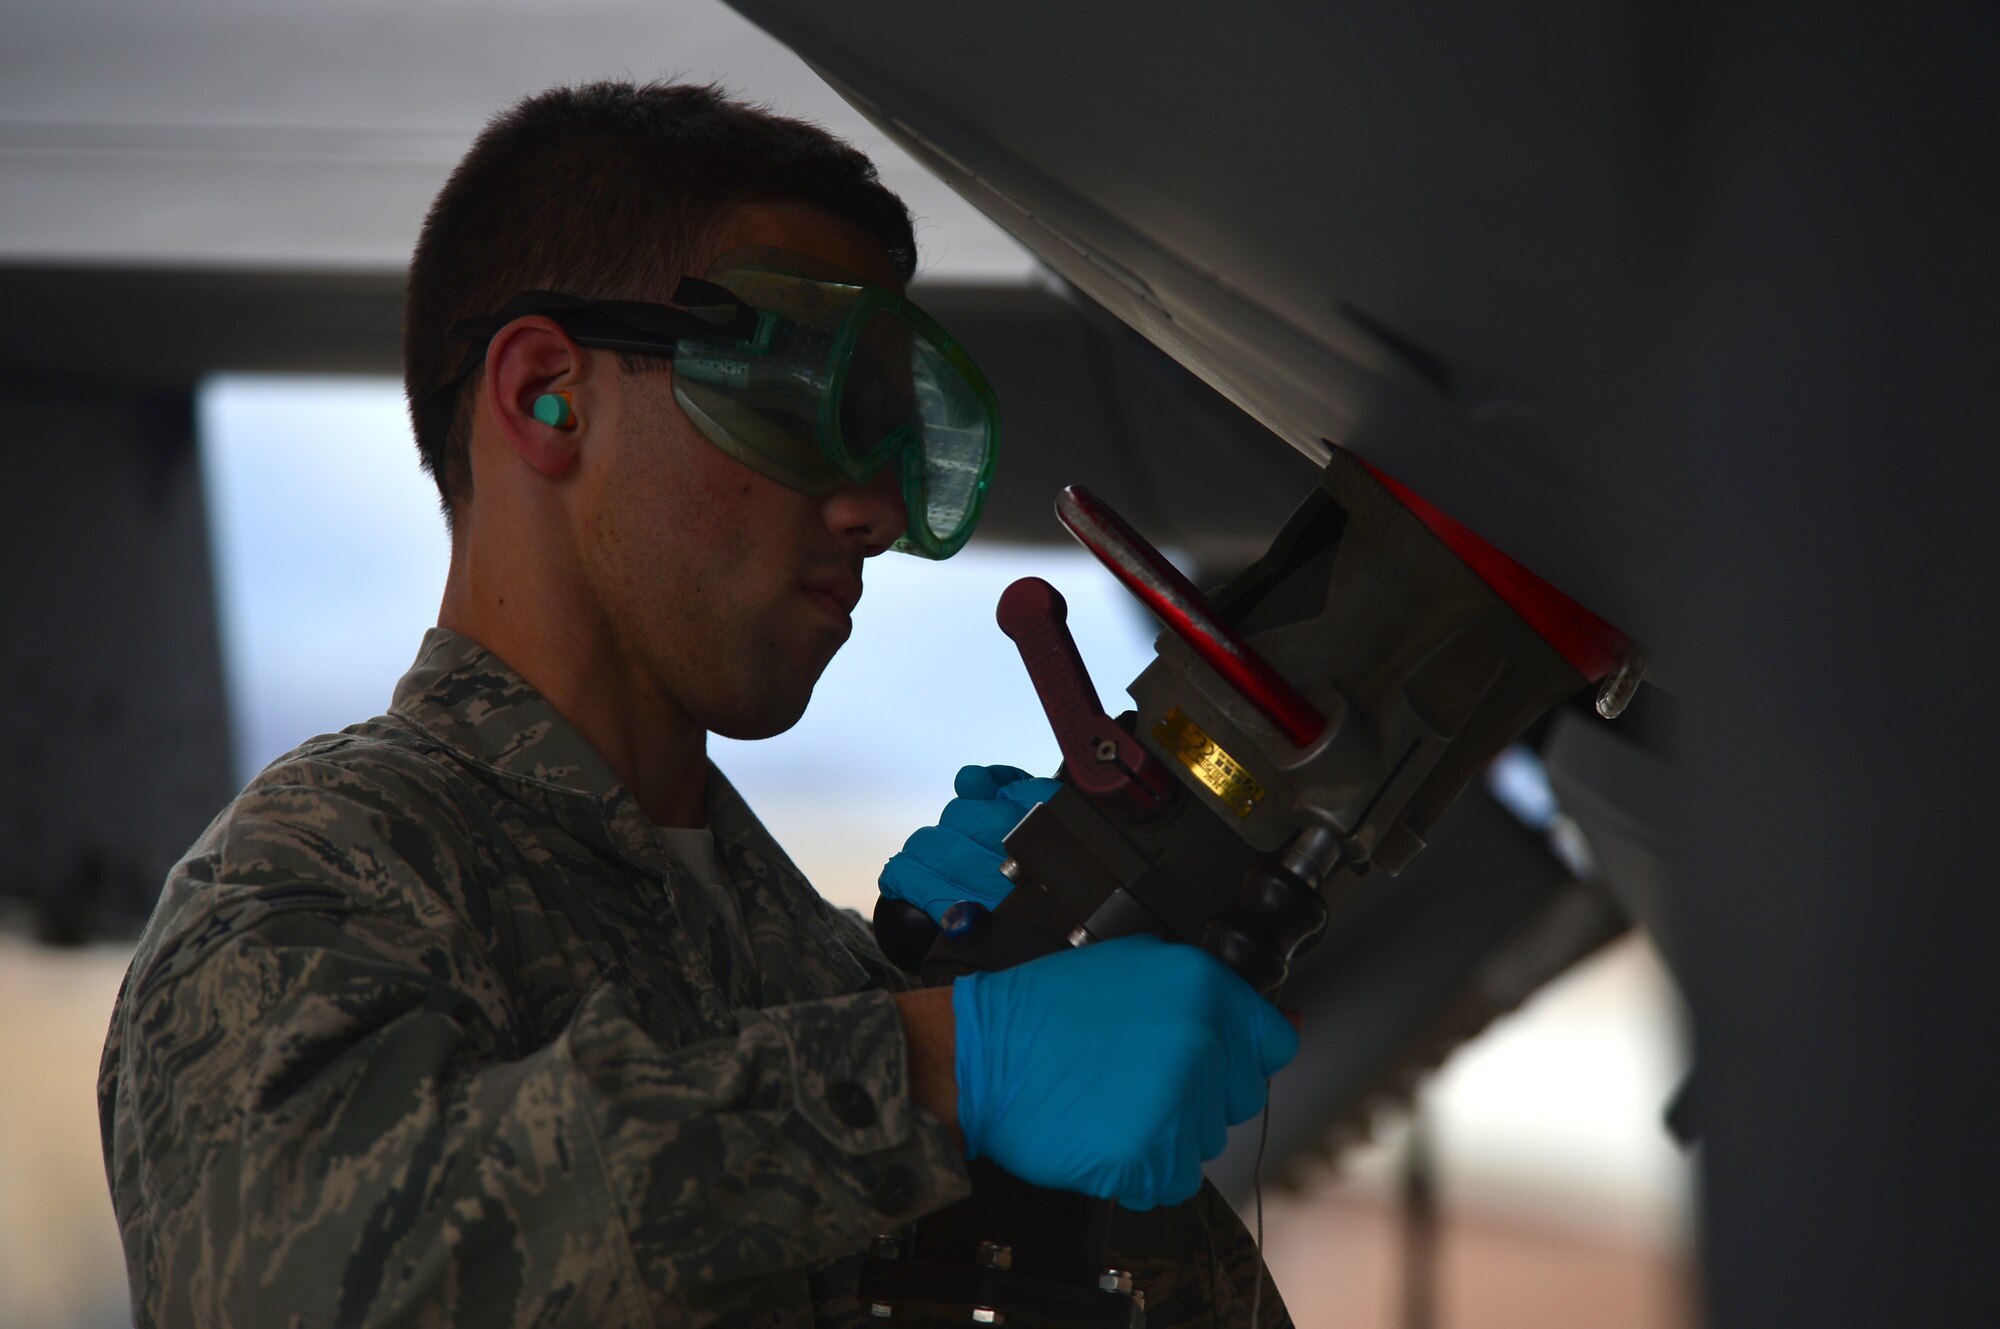 LAS VEGAS, Nev. -- A 432nd Aircraft Maintenance Squadron maintainer latches a fuel line onto remotely piloted aircraft during a post-flight inspection Oct. 28, 2013. The U.S. Air Force's MQ-1 Predator and MQ-9 Reaper remotely piloted aircraft fleet surpassed 2 million total flight hours on Oct. 22, 2013.  Remotely piloted aircraft fly in support of overseas contingency operations and humanitarian aid. (U.S. Air Force photo by Staff Sgt. N.B./released)